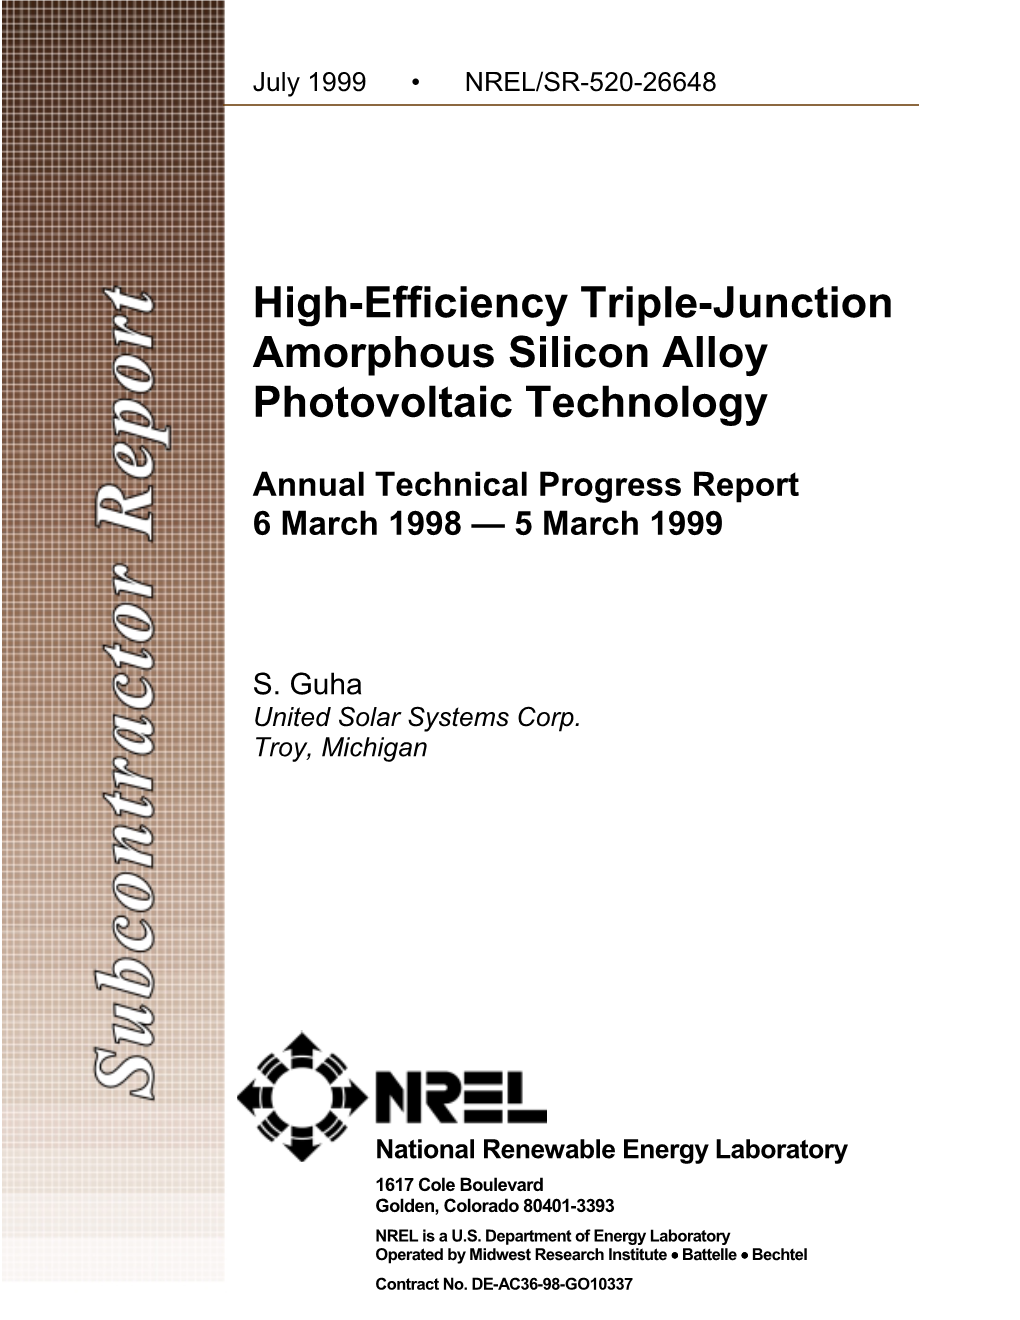 High-Efficiency Triple-Junction Amorphous Silicon Alloy Photovoltaic Technology